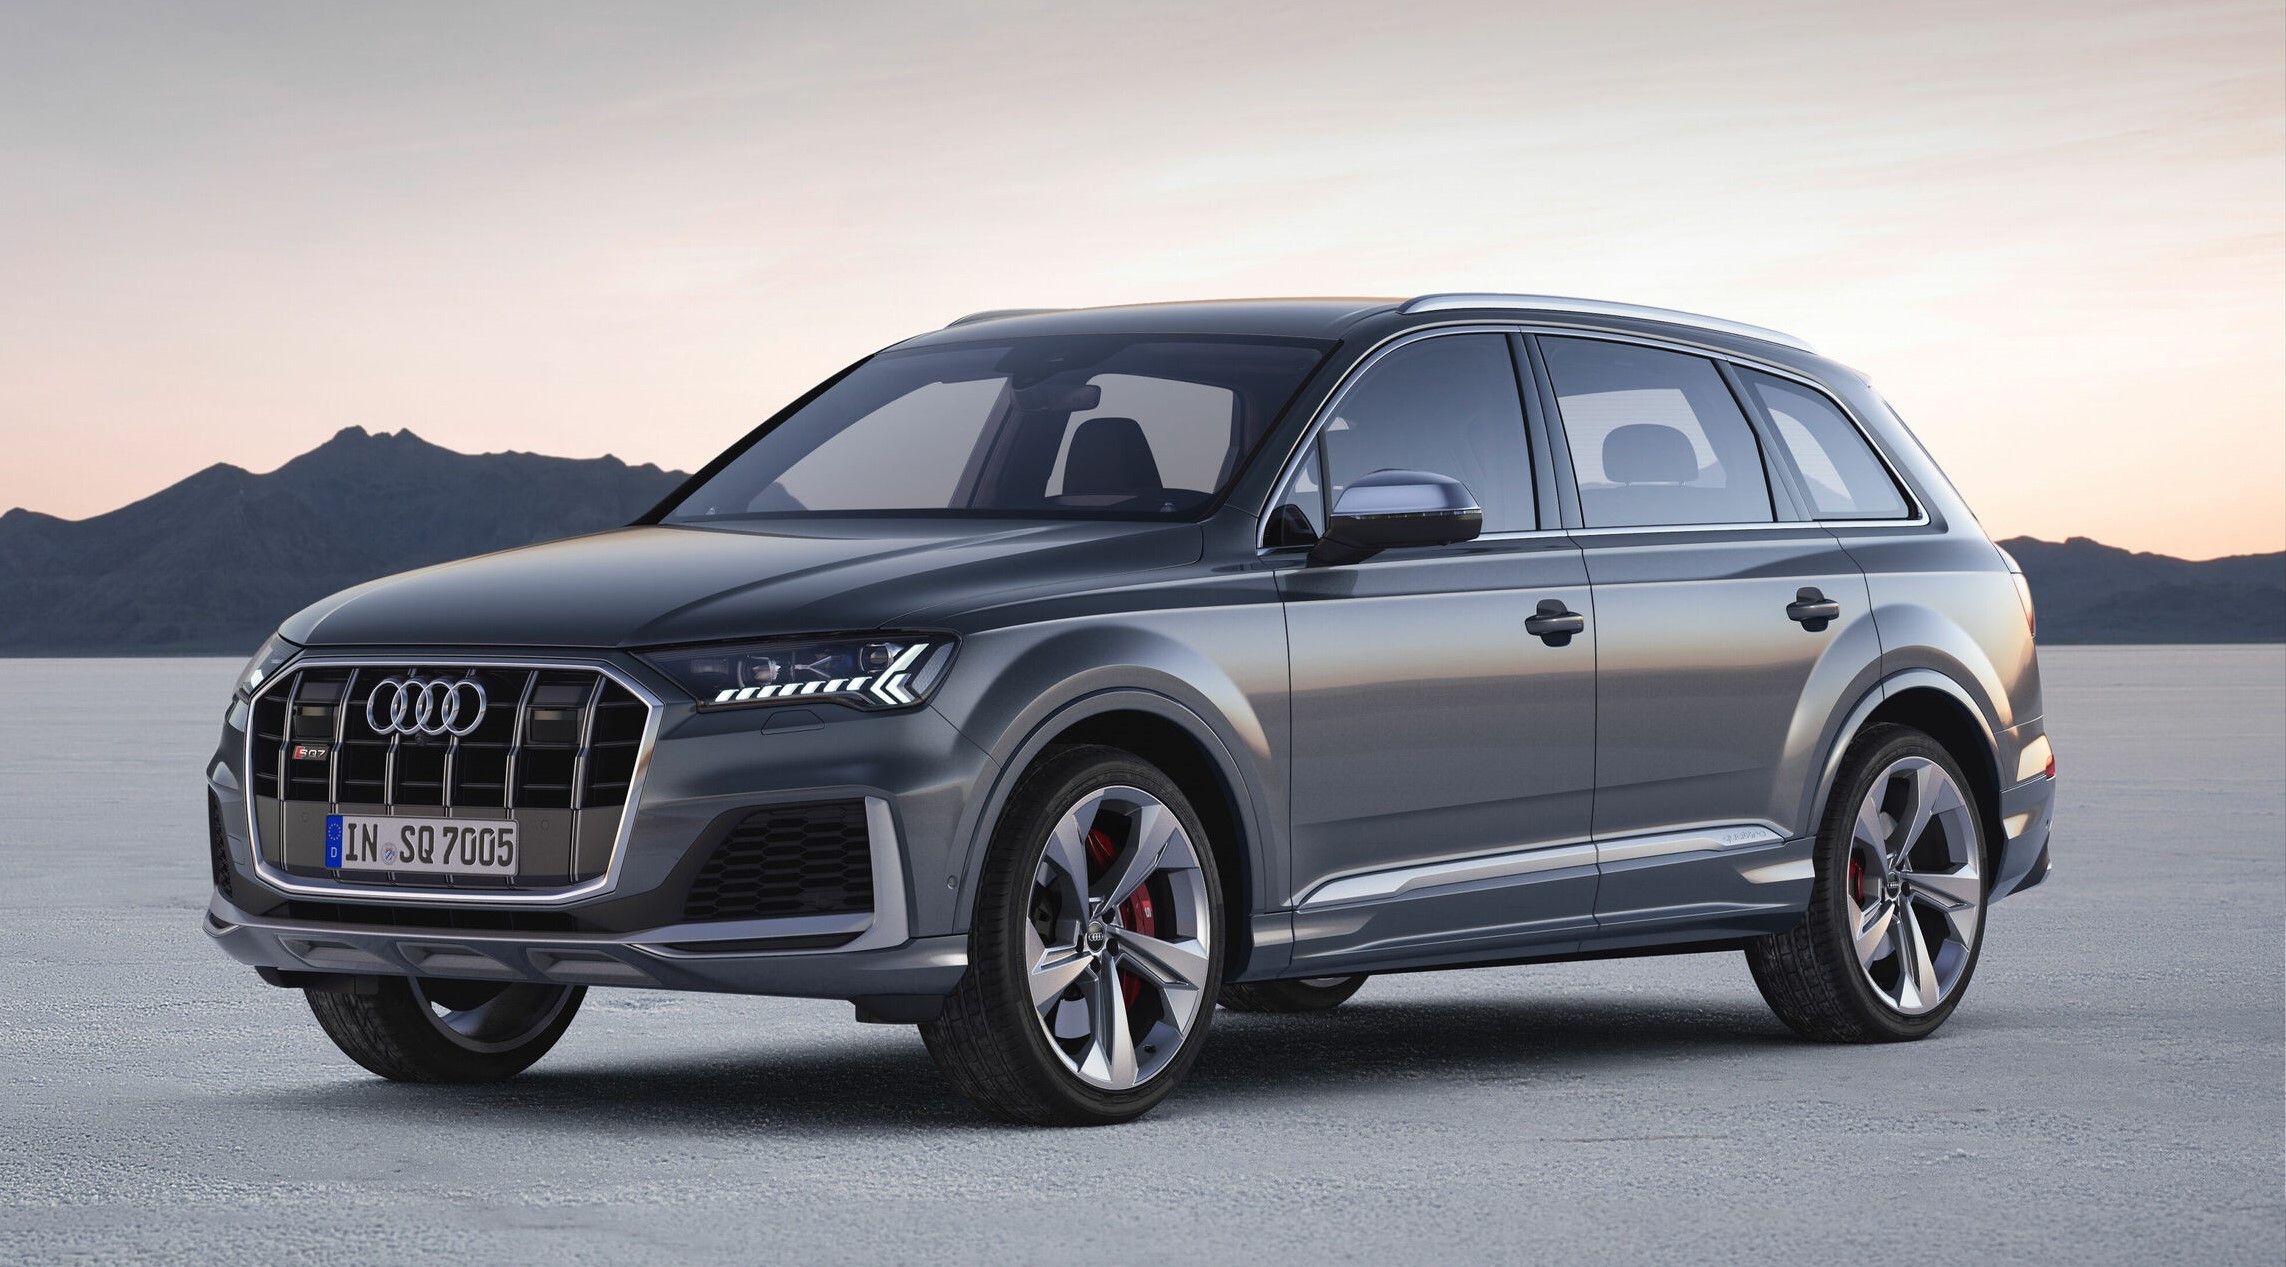 Gray 2020 Audi SQ7 on the road